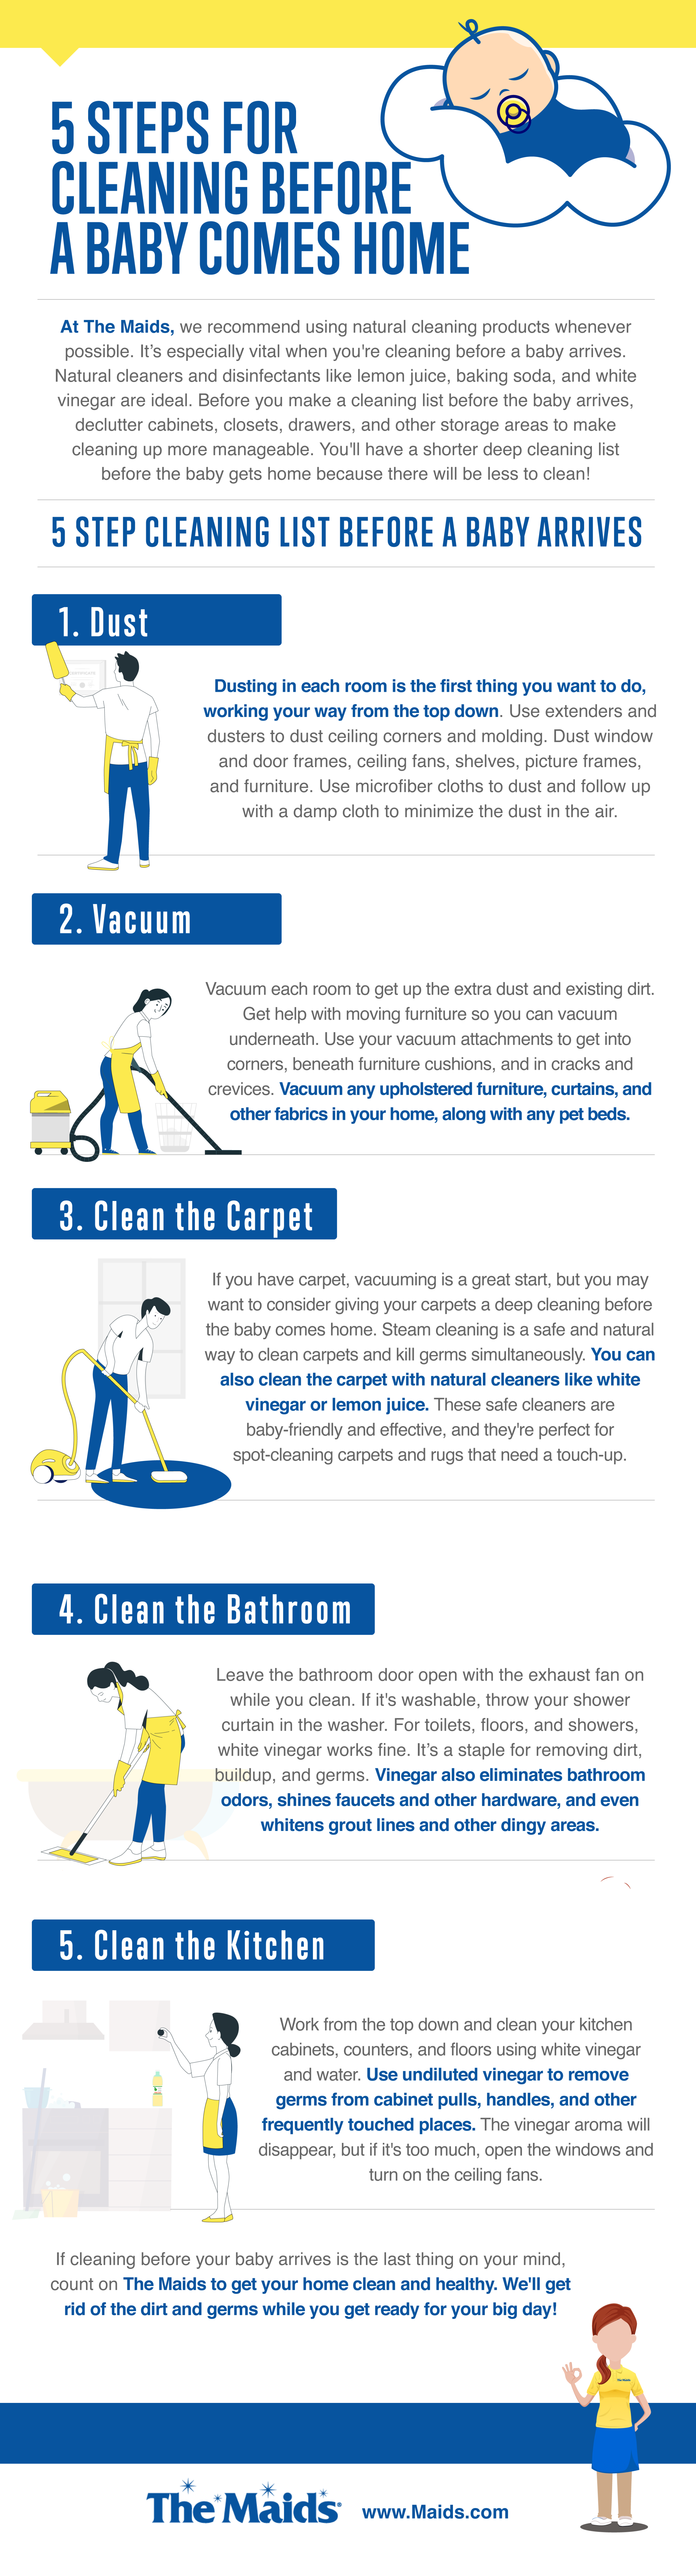 Infographic Cleaning Before a Baby Comes Home